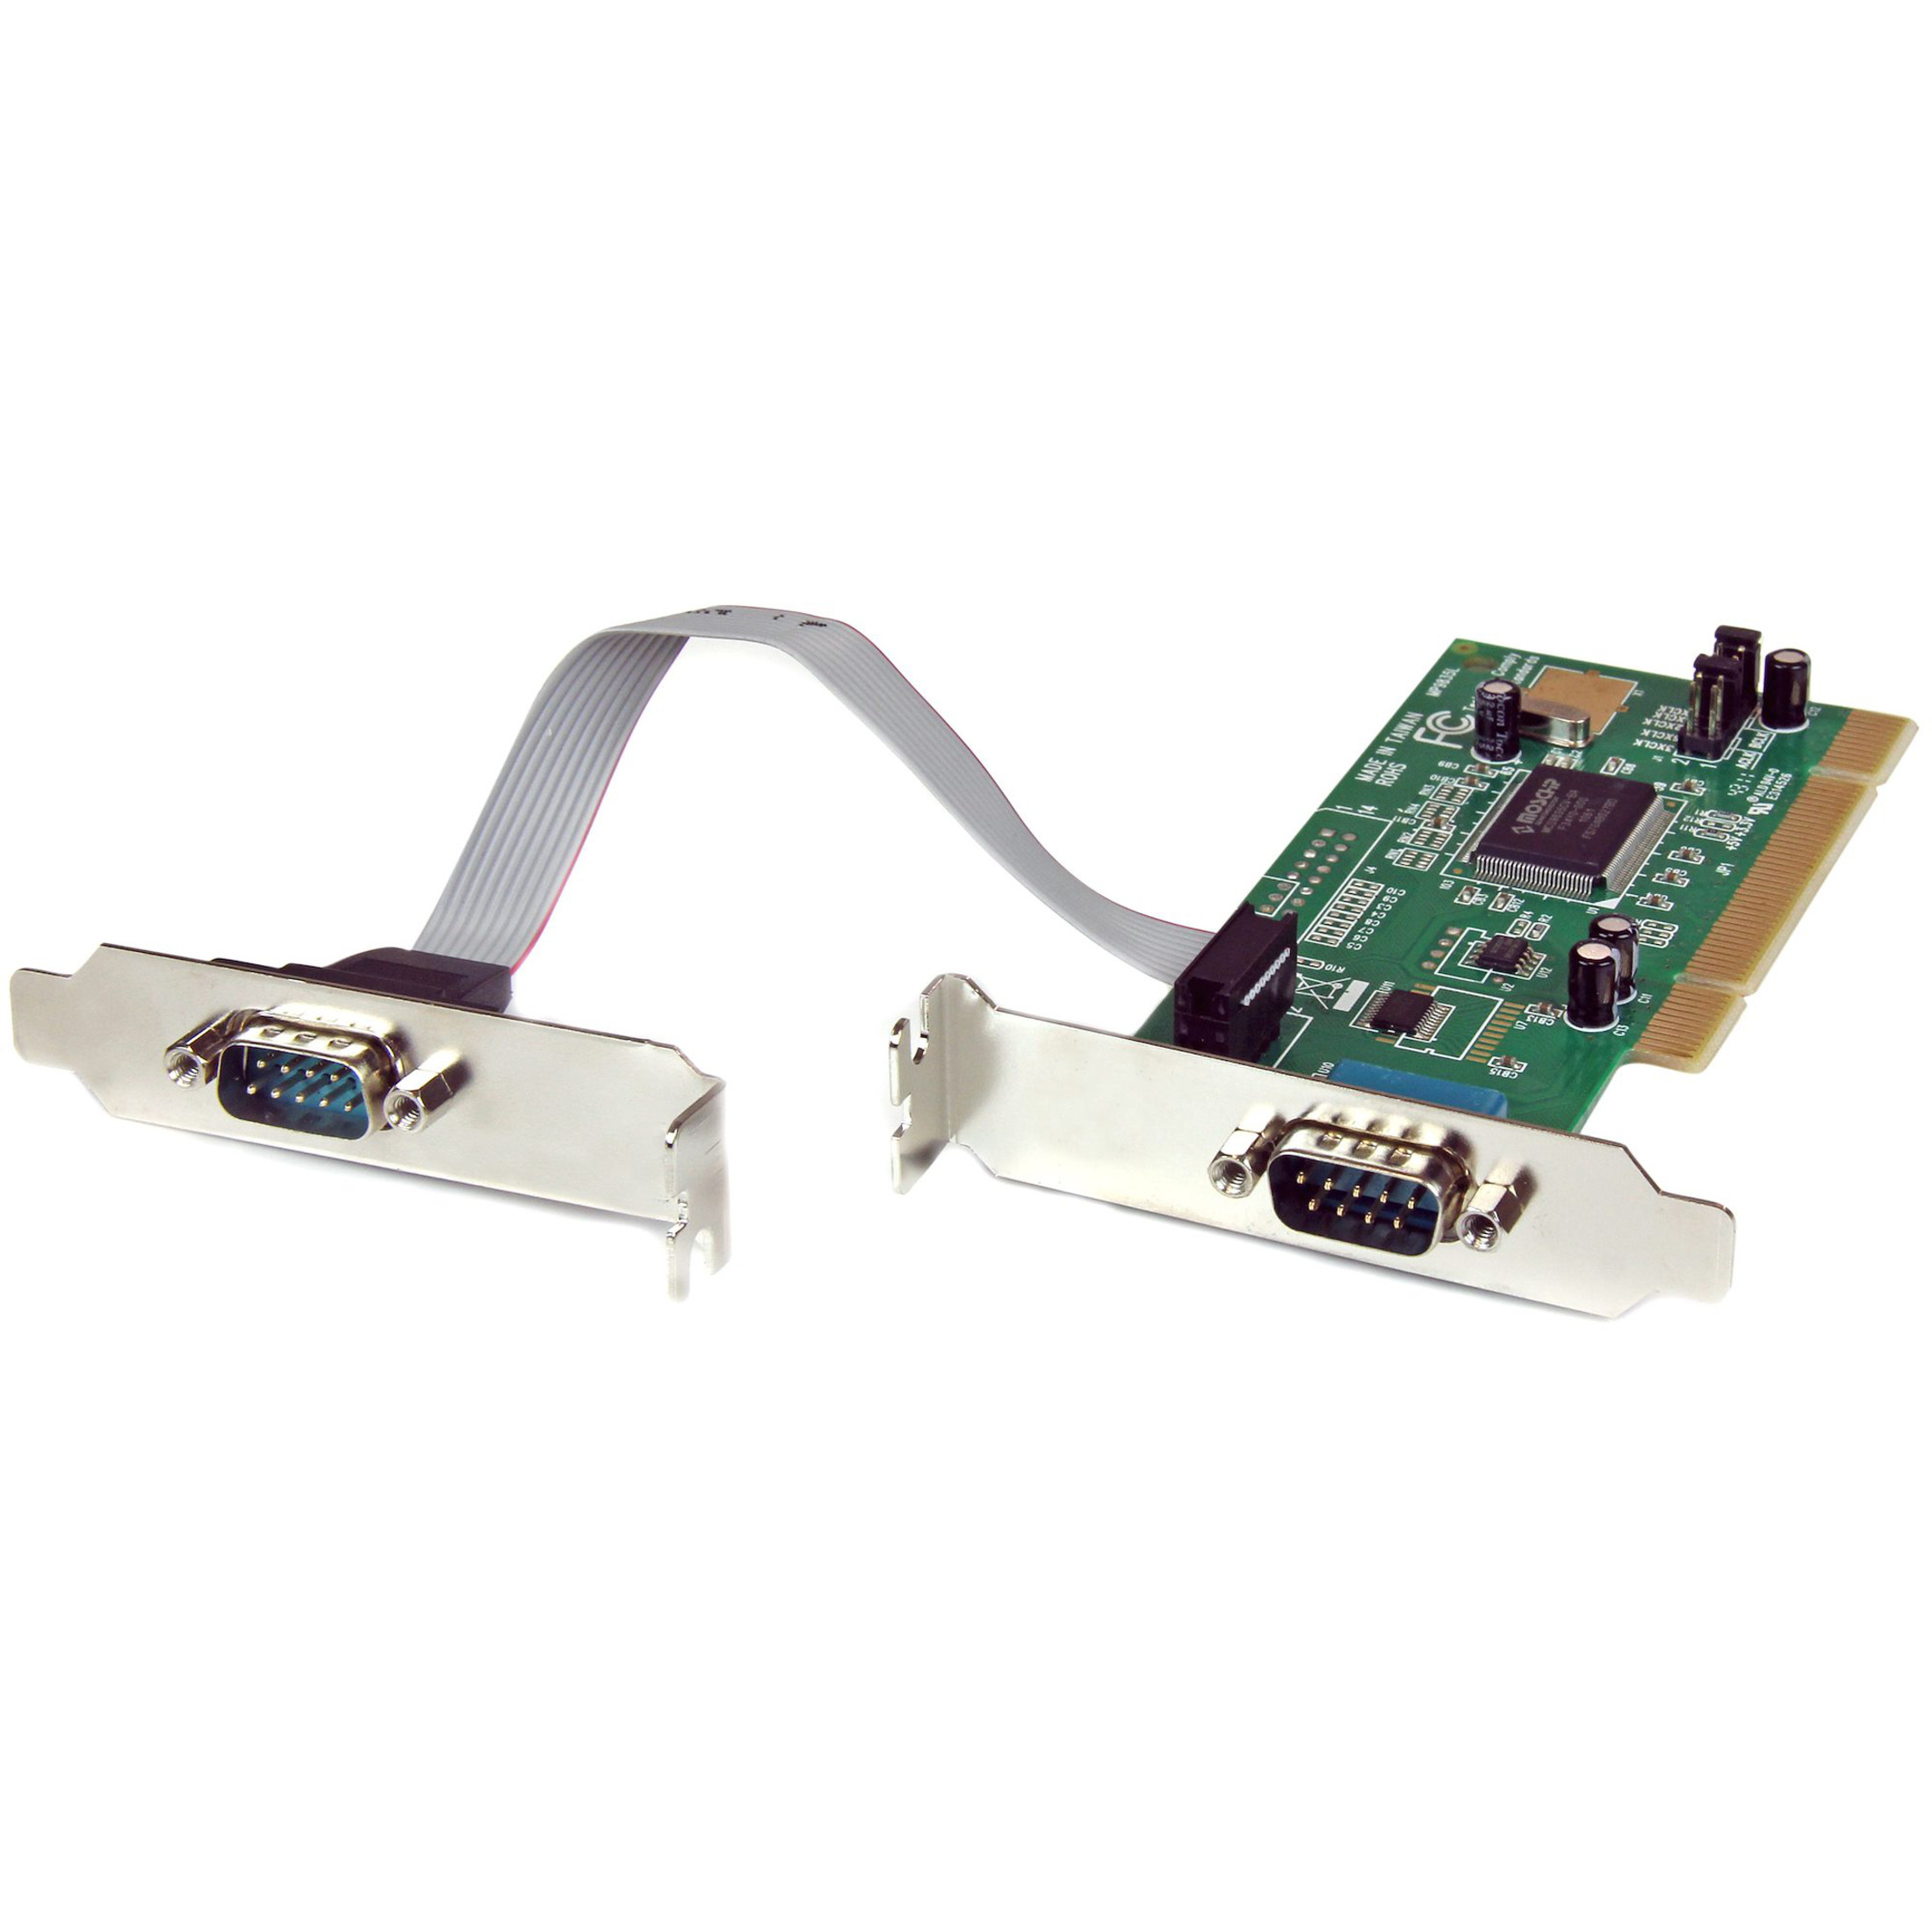 Startech .com 2 Port PCI Low Profile RS232 Serial Adapter Card with 16550 UARTLow Profile 2 Port 16550 Serial PCI CardSerial adapter -… PCI2S550_LP